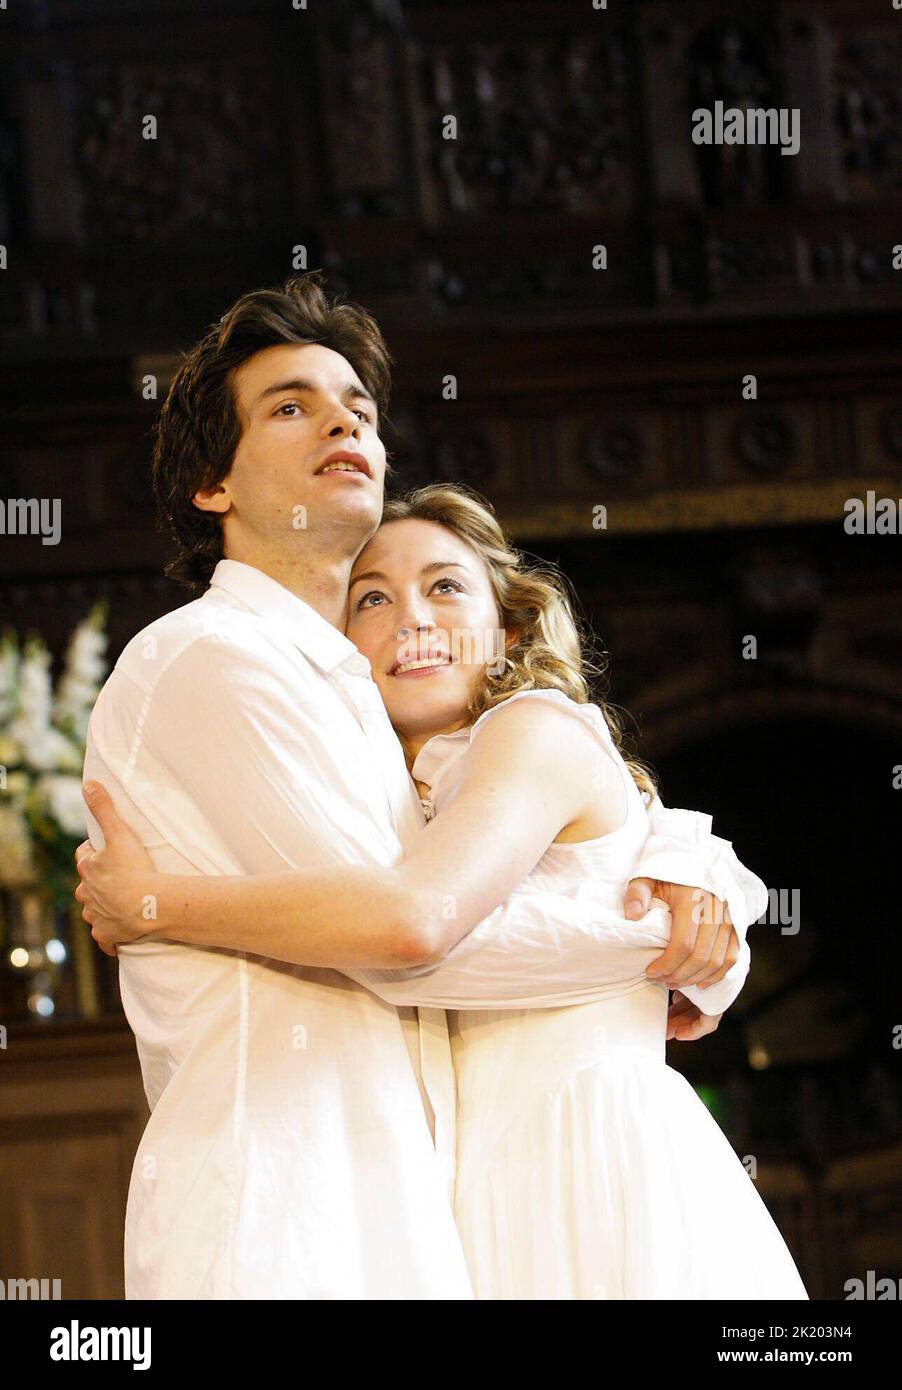 Santiago Cabrera (Romeo), Juliet Rylance (Juliet) in ROMEO AND JULIET by Shakespeare at Middle Temple Hall, London EC4   26/08/2008  a Theatre of Memory production  costume design: Jenny Tiramani  director: Tamara Harvey Stock Photo